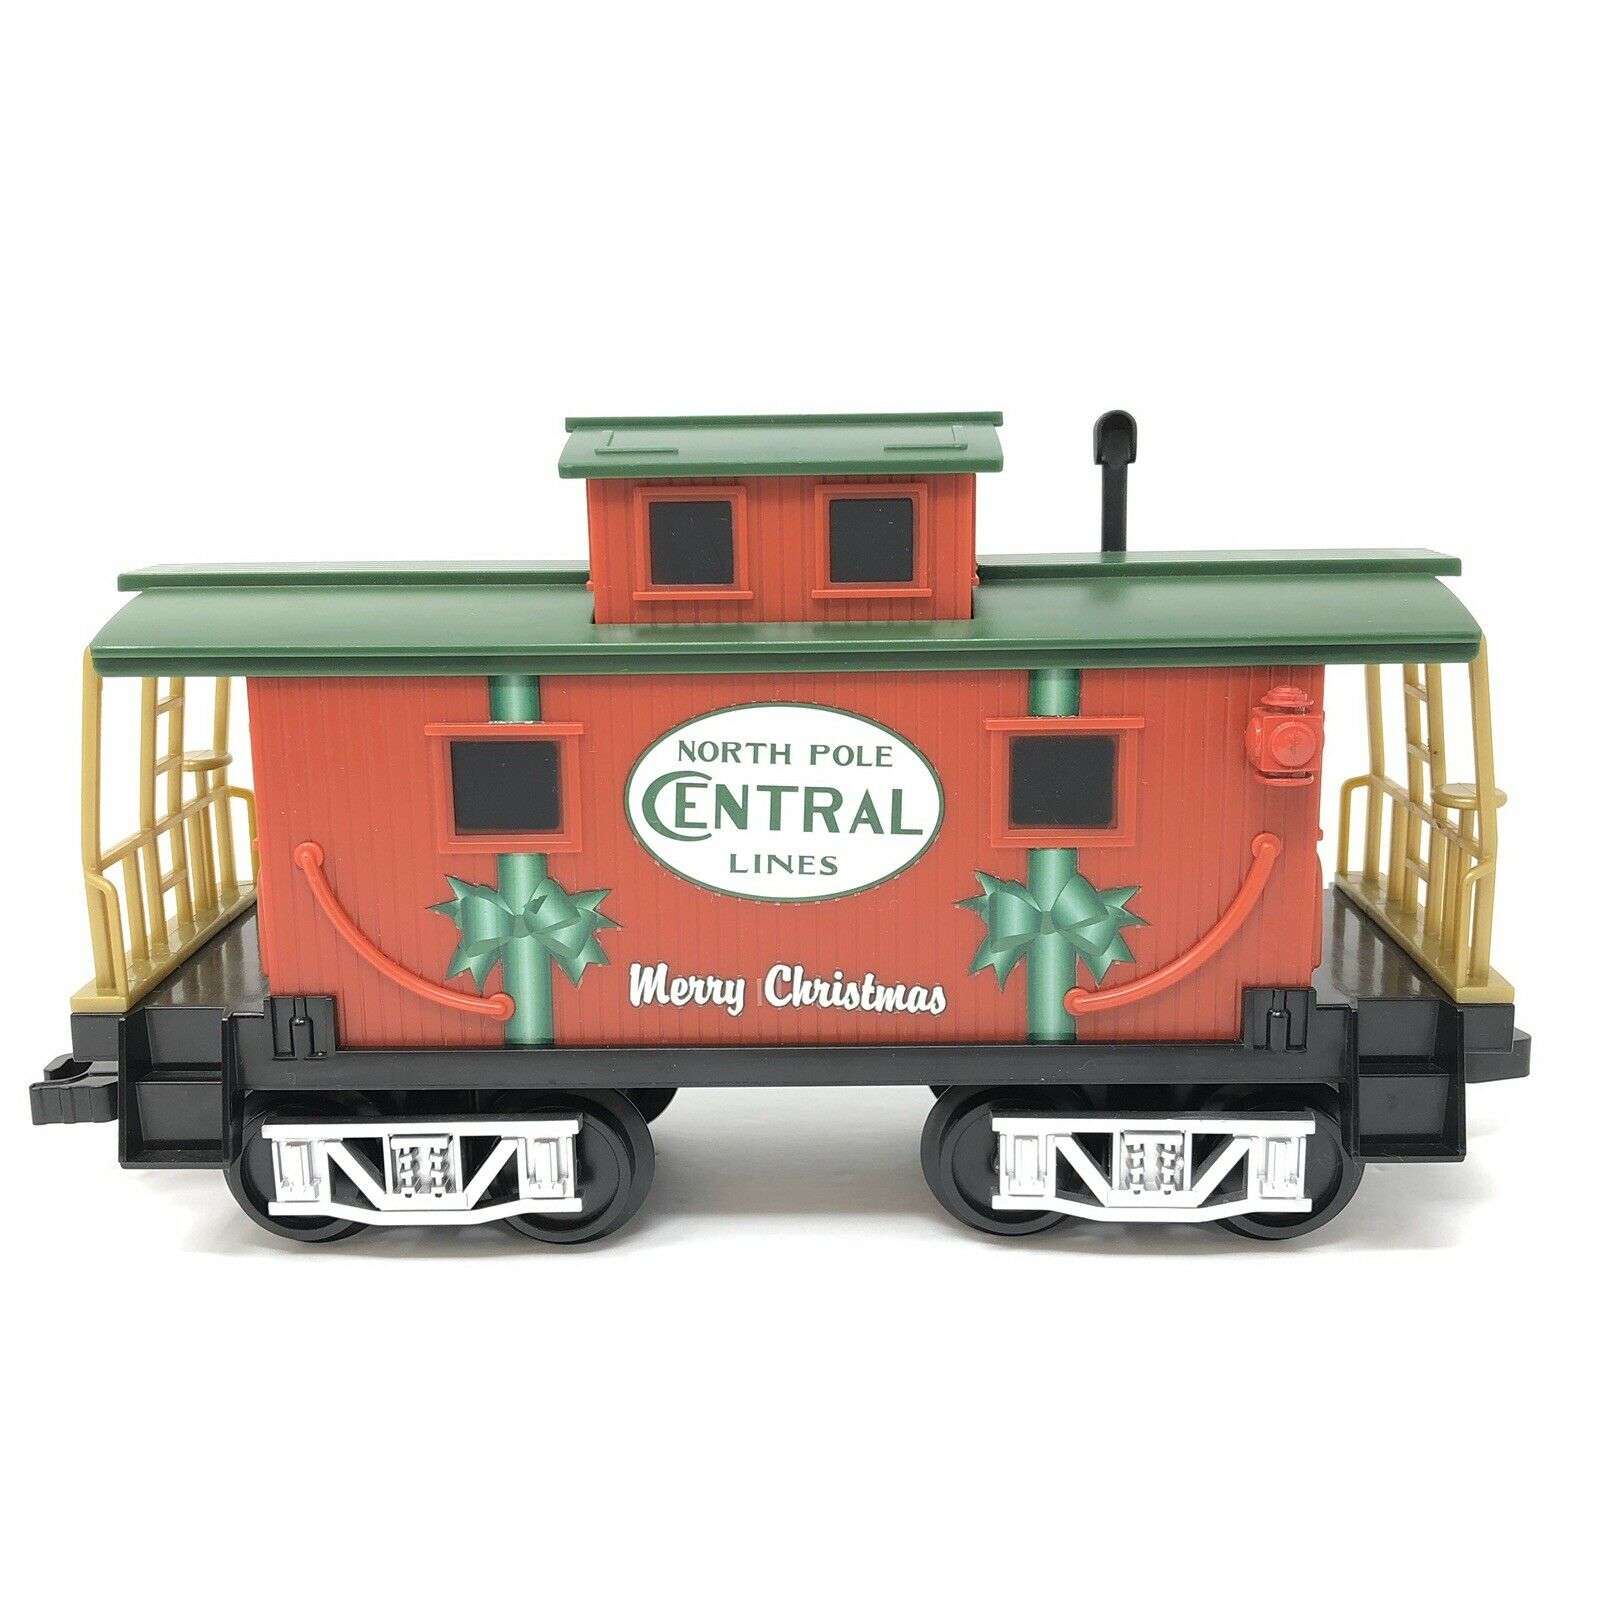 Lionel Ready To Play Train Caboose North Pole Central Lines -from 7-11729 Set